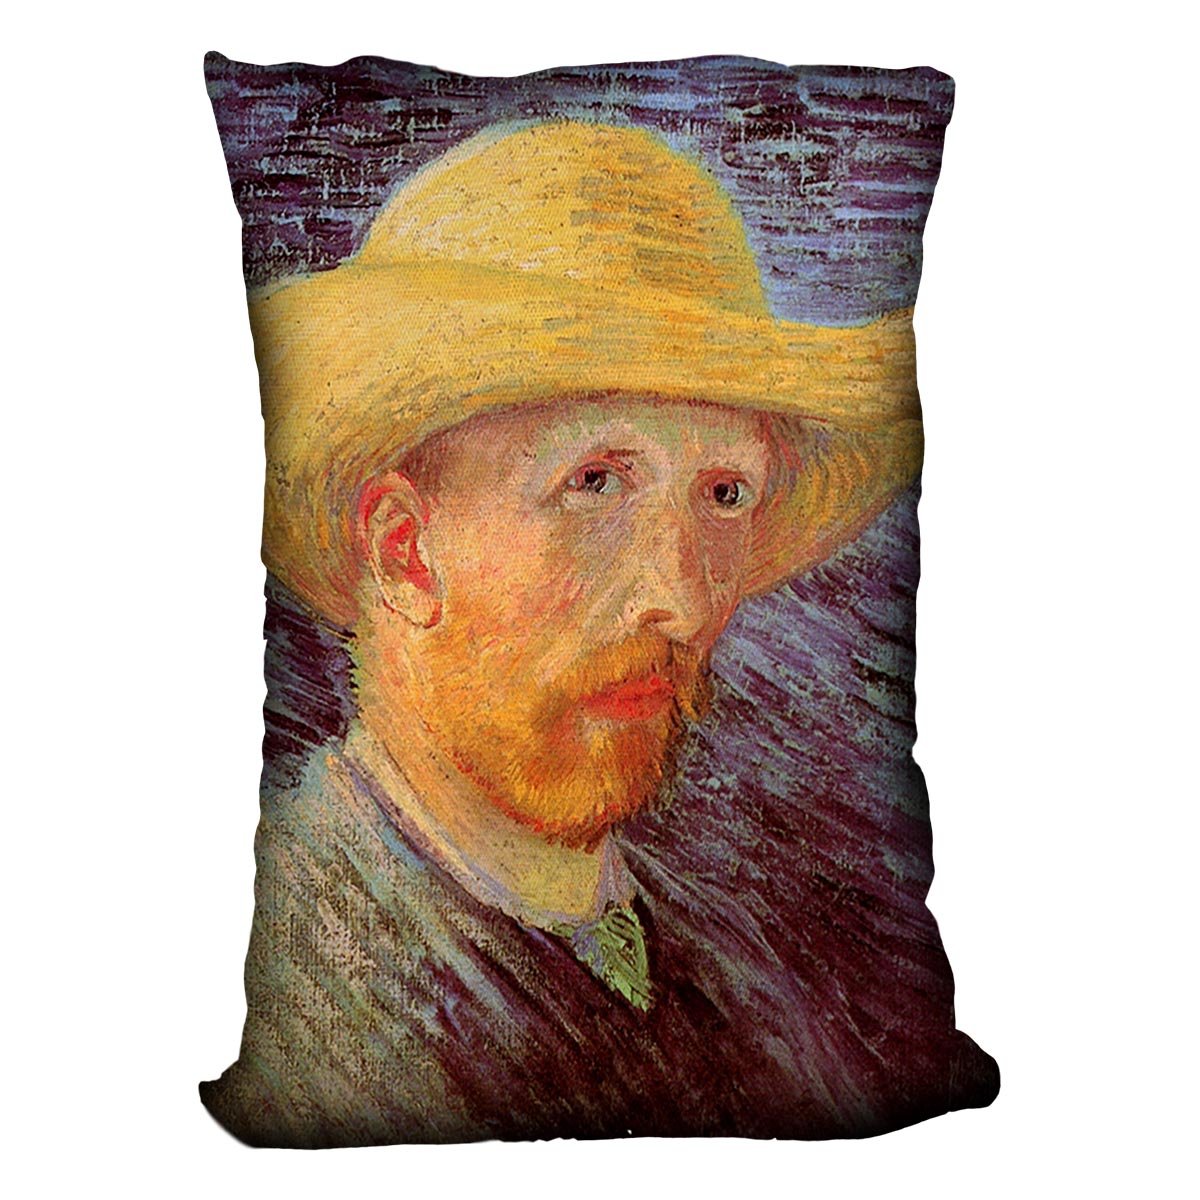 Self-Portrait with Straw Hat by Van Gogh Throw Pillow